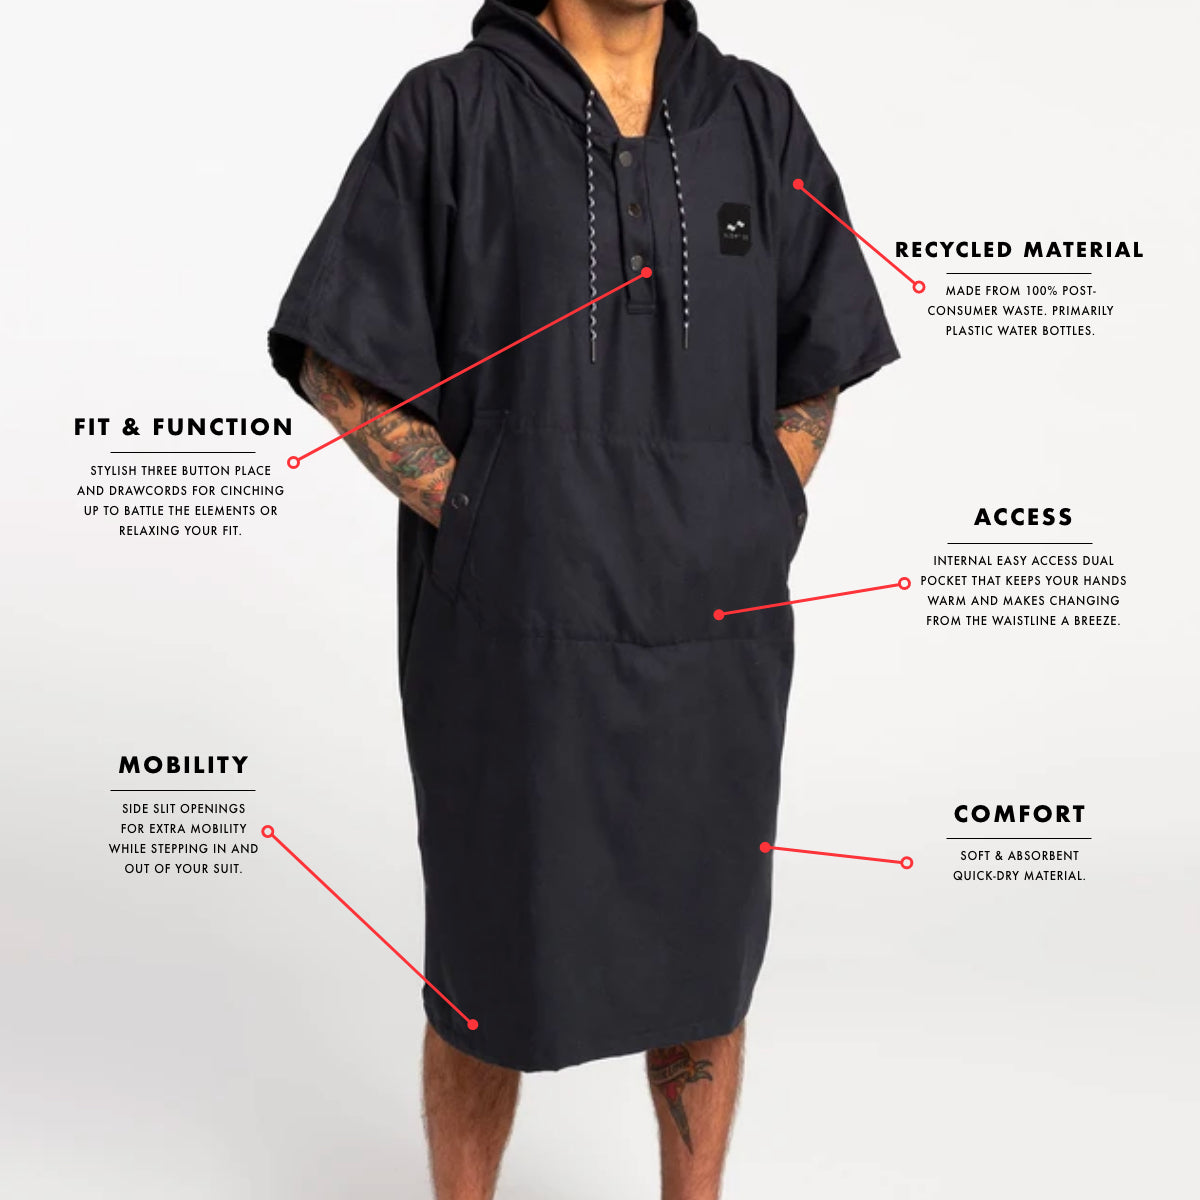 Rooster® Quick-Dry Poncho